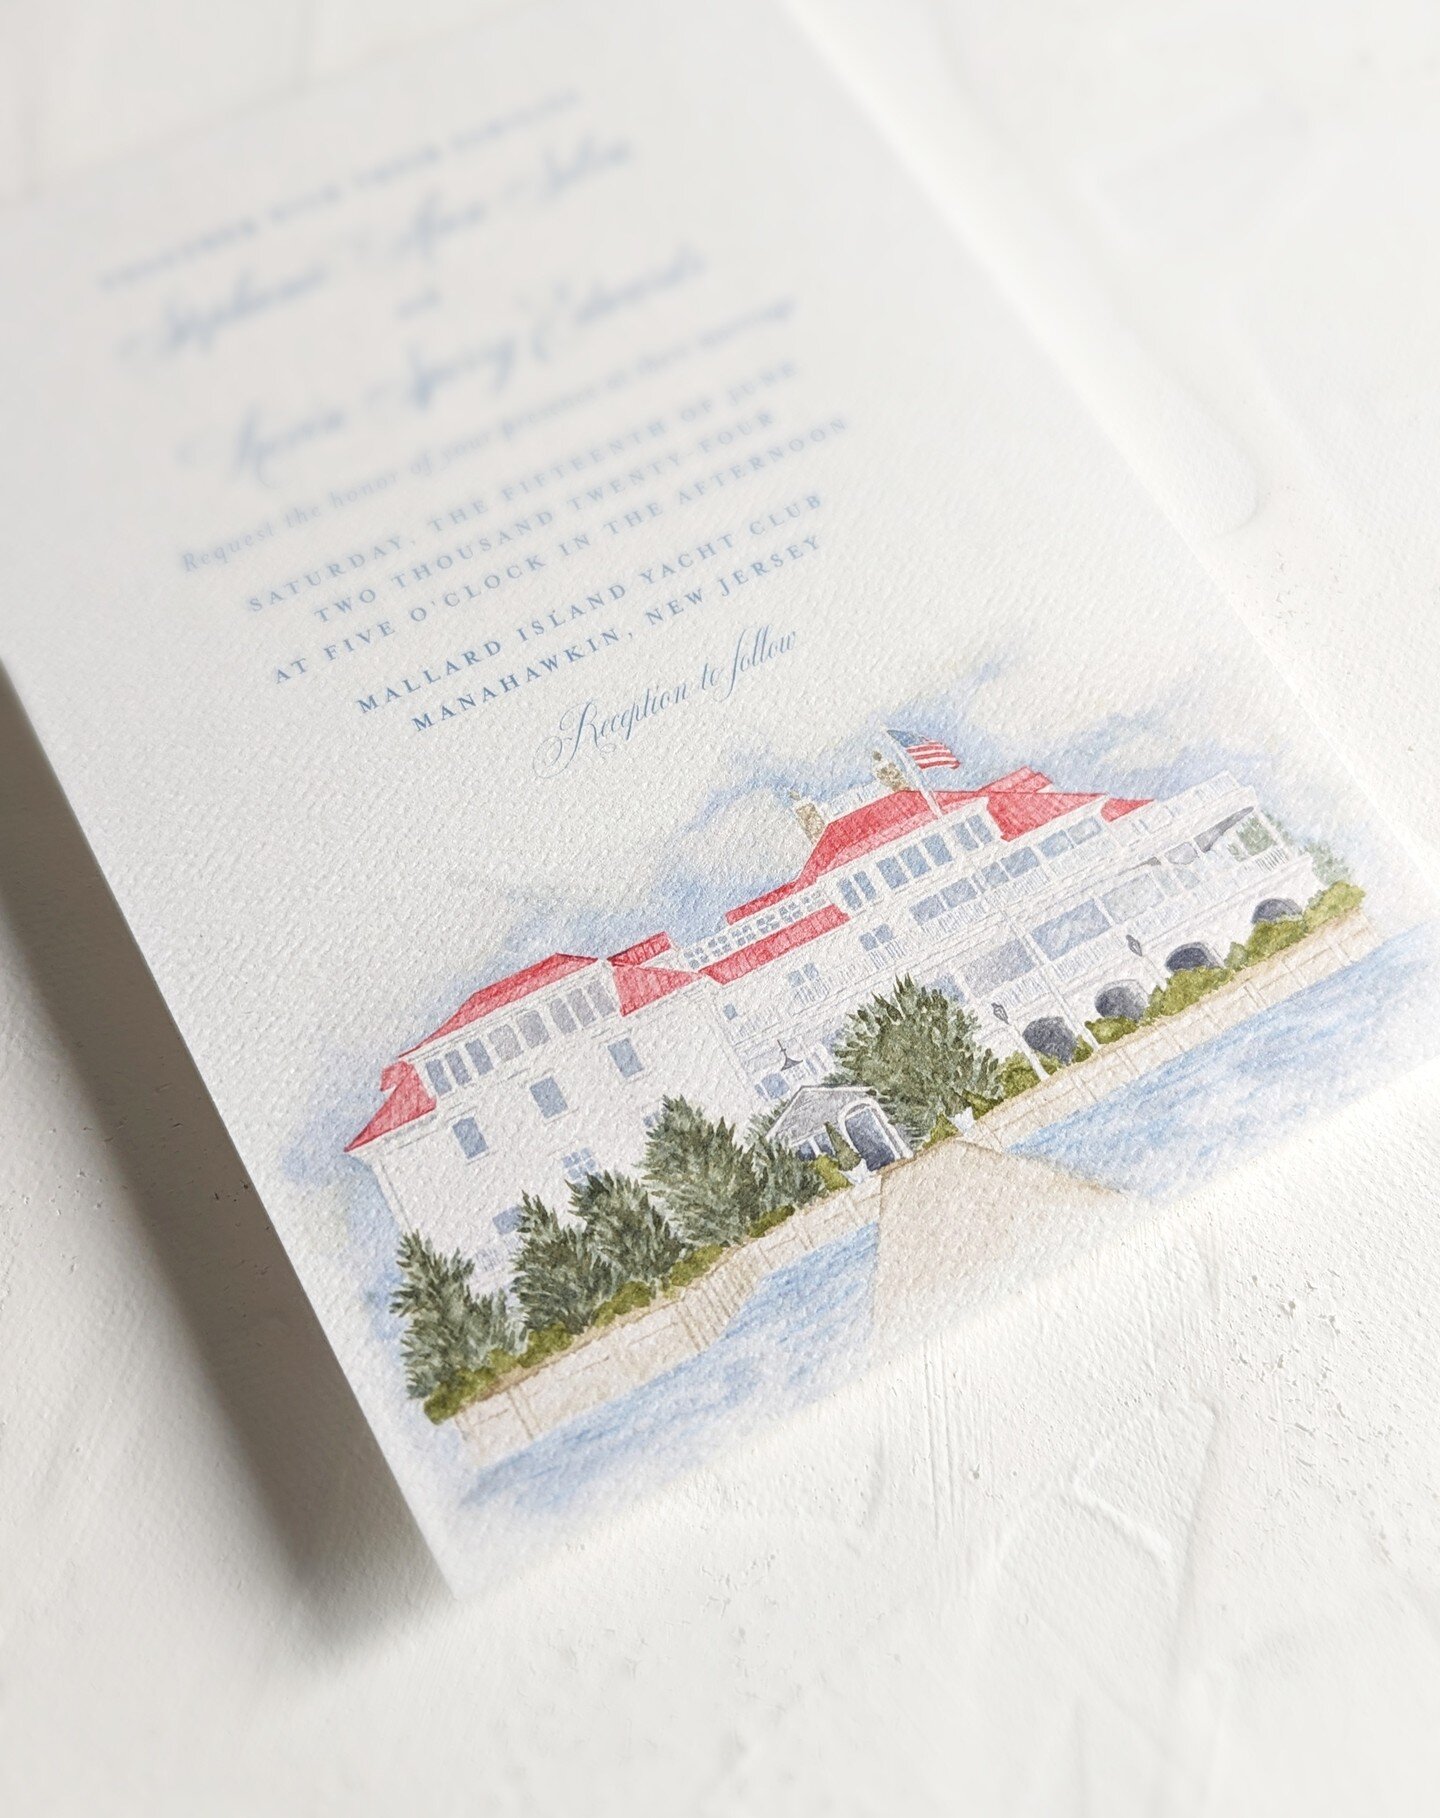 Sneak peak of a wedding invitation suite including a watercolor illustration of the venue. The Mallard Island Yacht Club is significant to the couple&rsquo;s love story, and they wanted it to be captured in their wedding invitation. It&rsquo;s such a